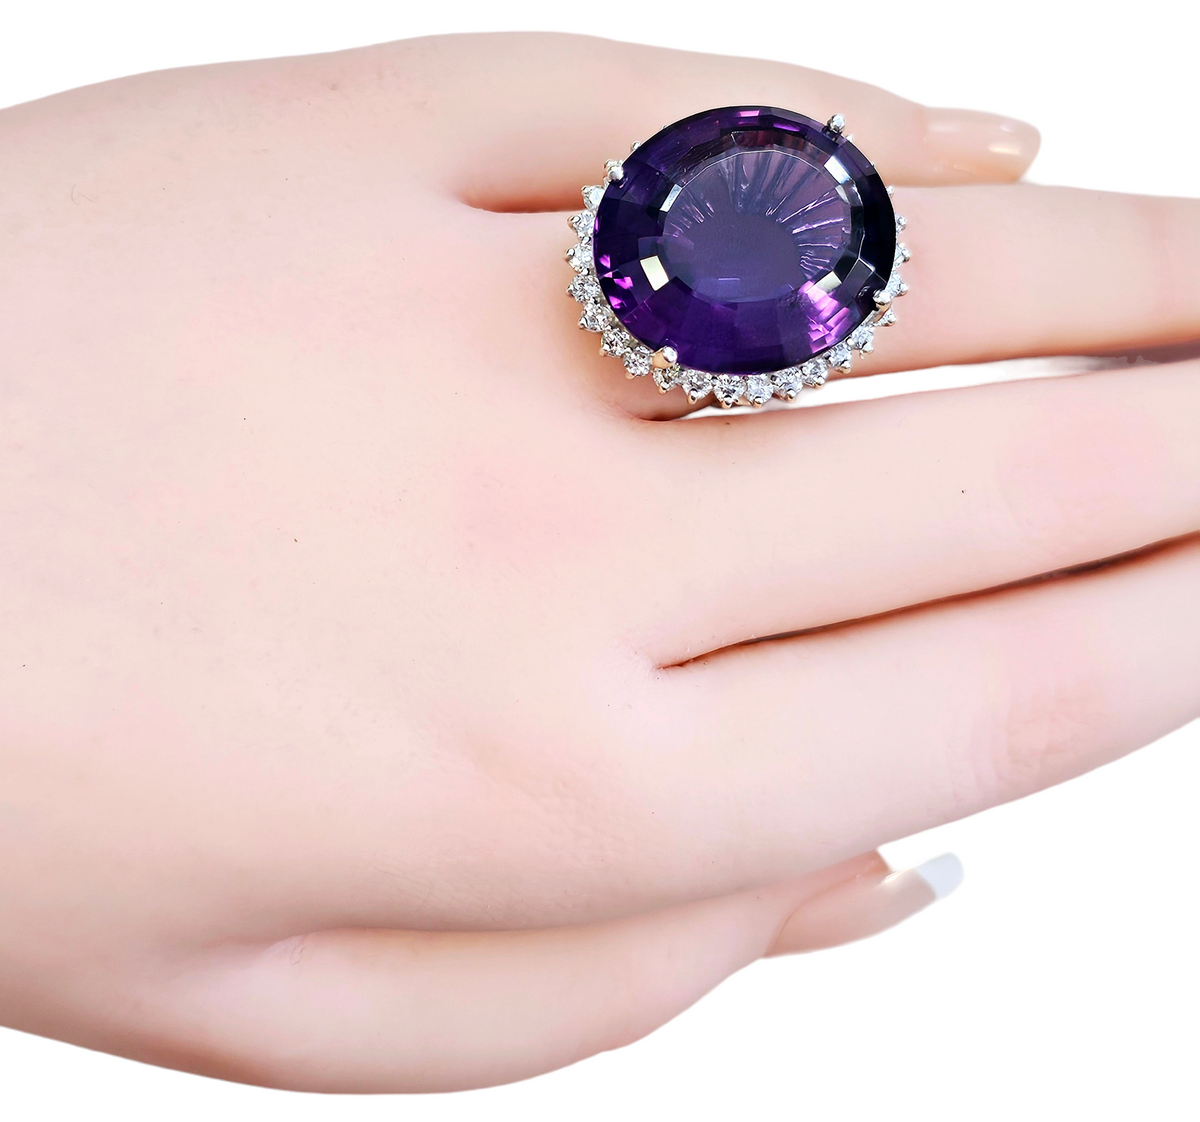 Large Oval Amethyst Ring with Diamond Halo made in 14-Karat White Gold